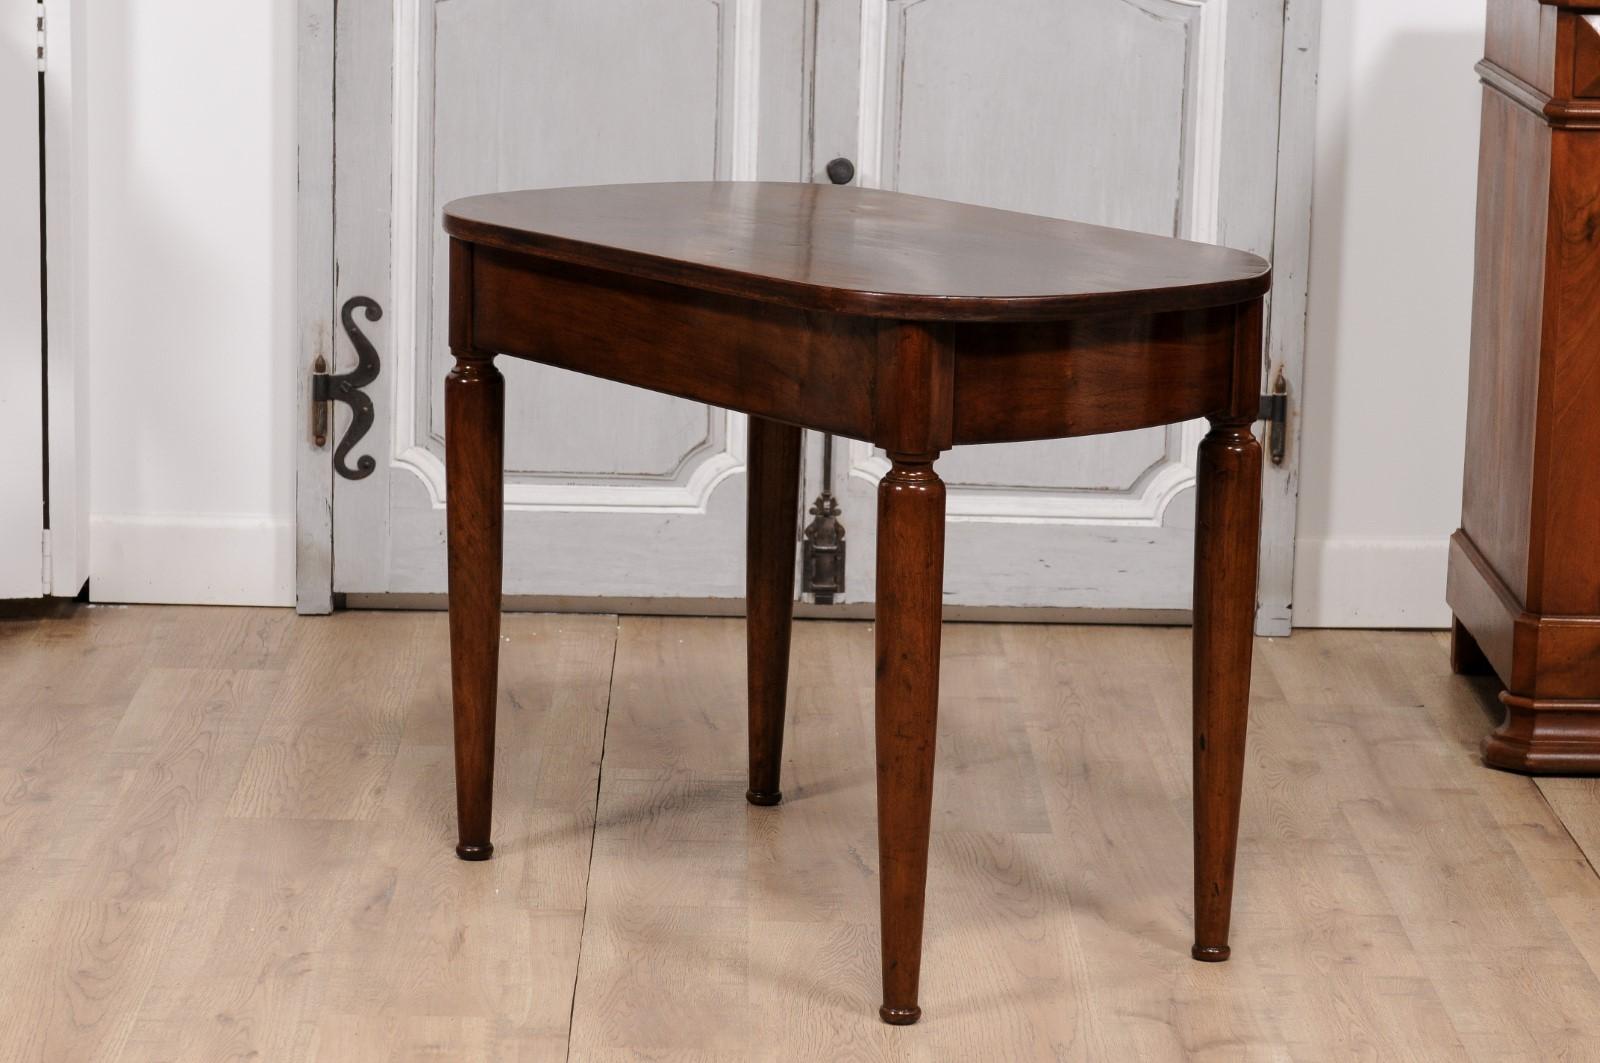 Italian Walnut 1890s Side Table with Oval Top, One Drawer and Cylindrical Legs For Sale 5